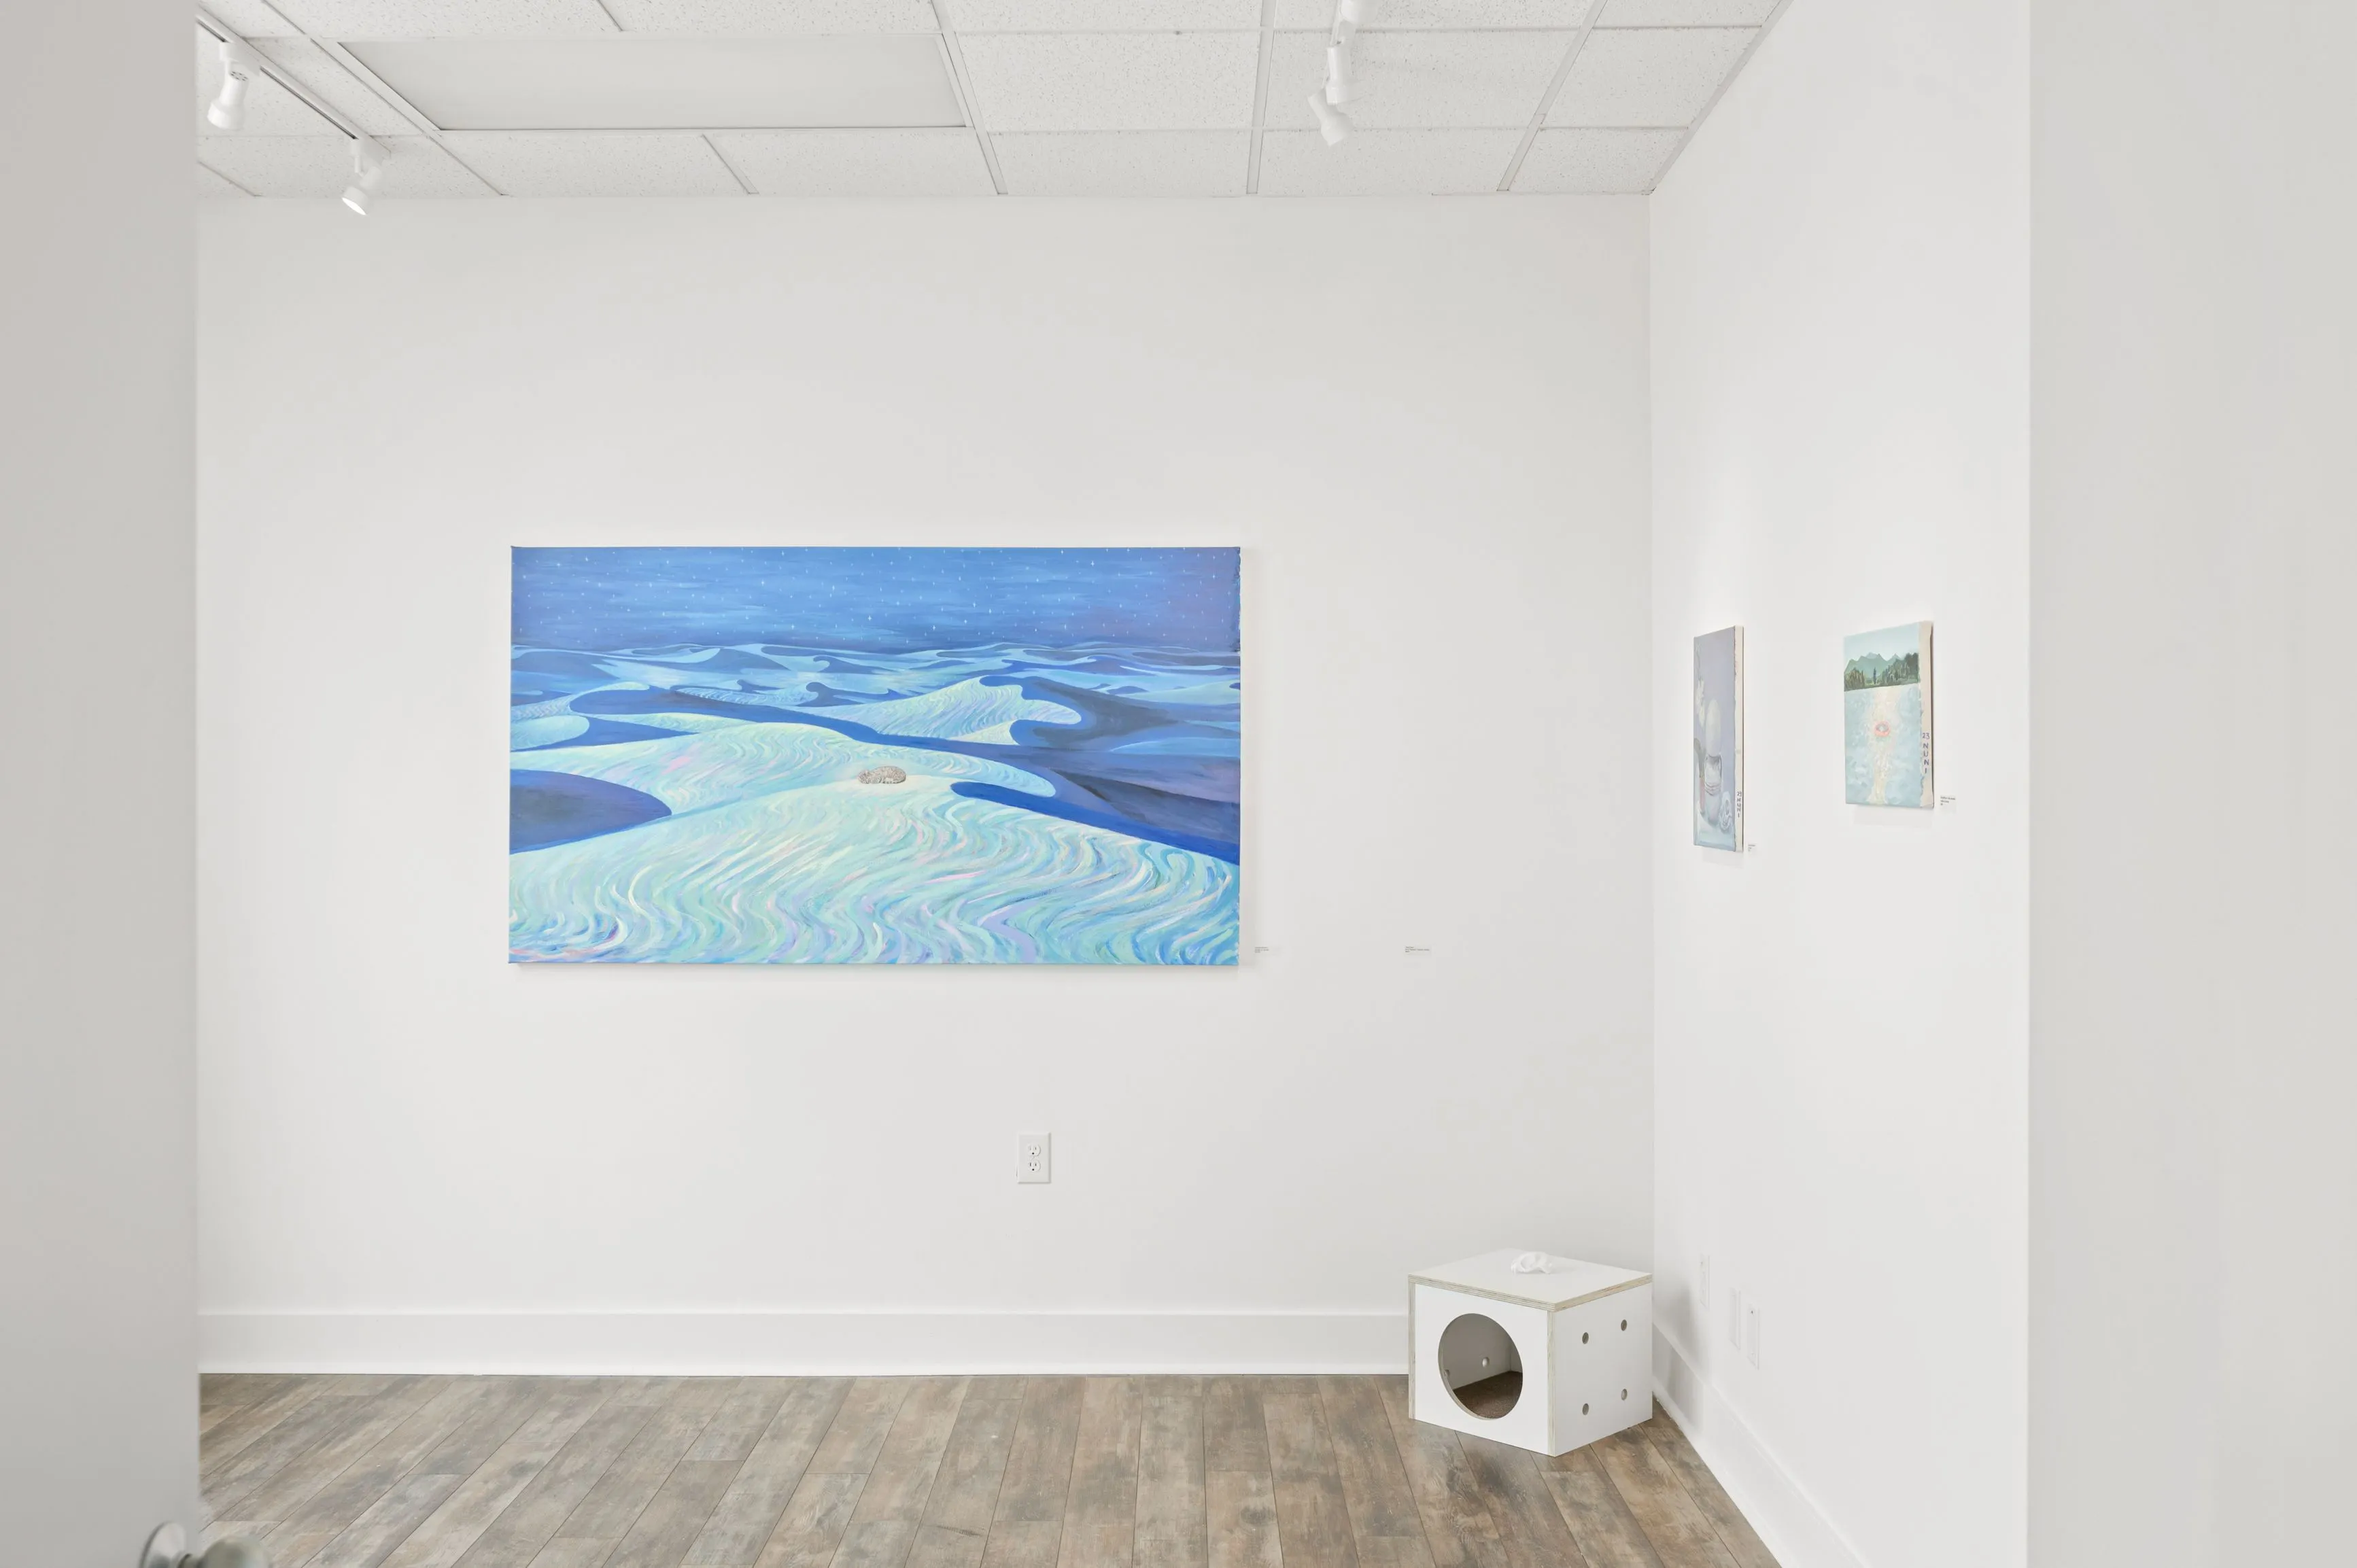 Art gallery interior with a large photograph of an ocean view hanging on a white wall, wooden flooring, and small information placards to the right.